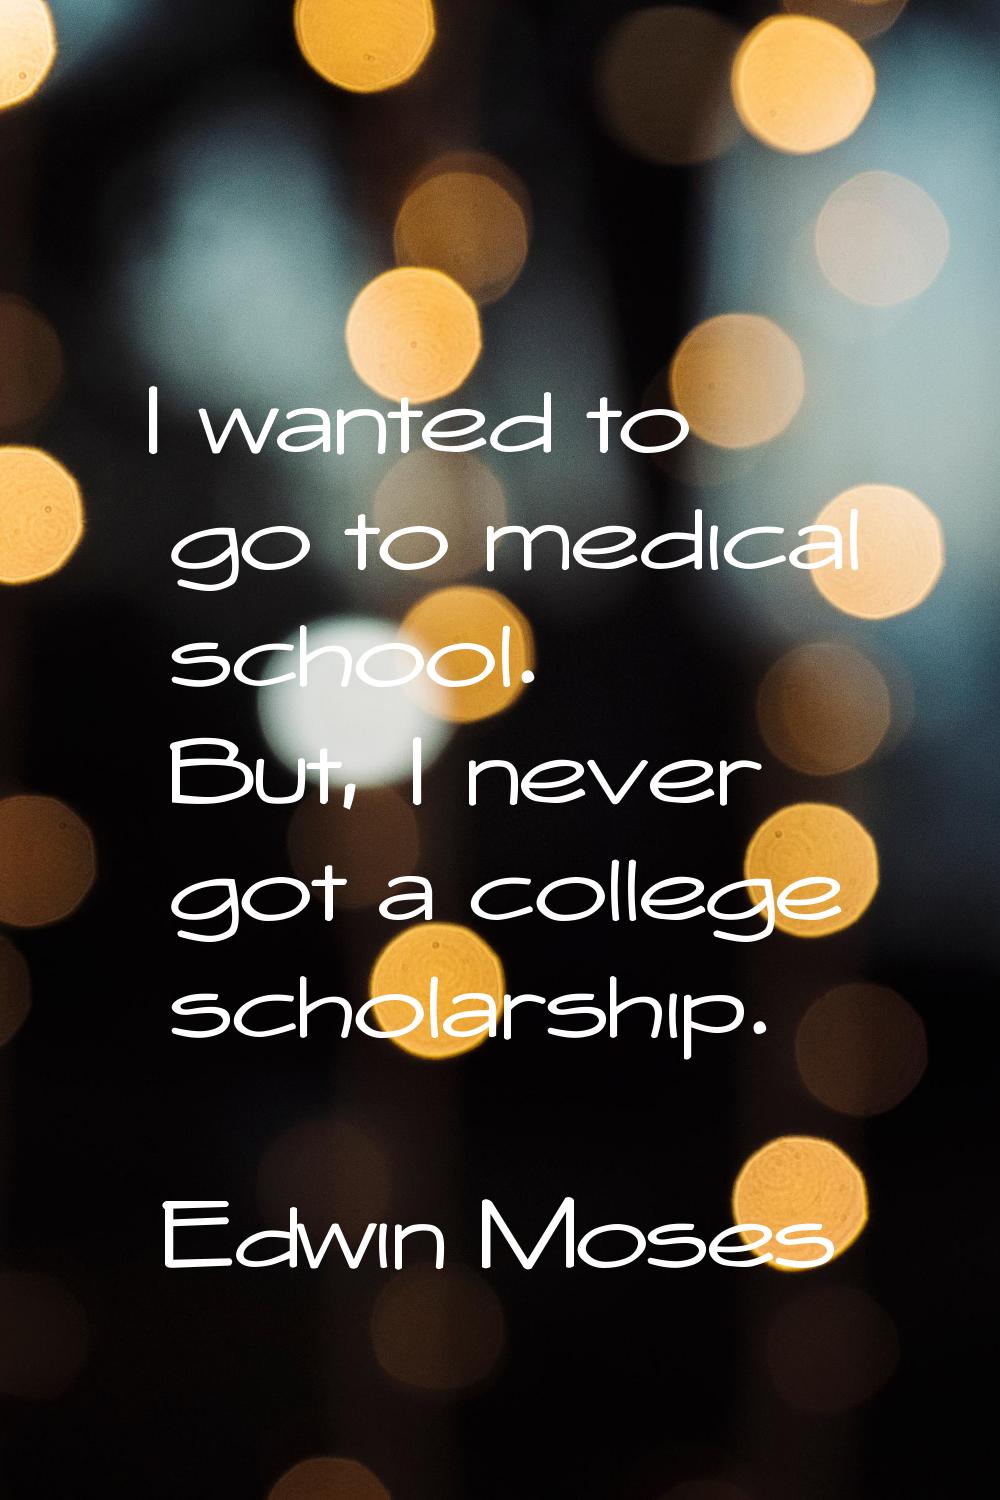 I wanted to go to medical school. But, I never got a college scholarship.